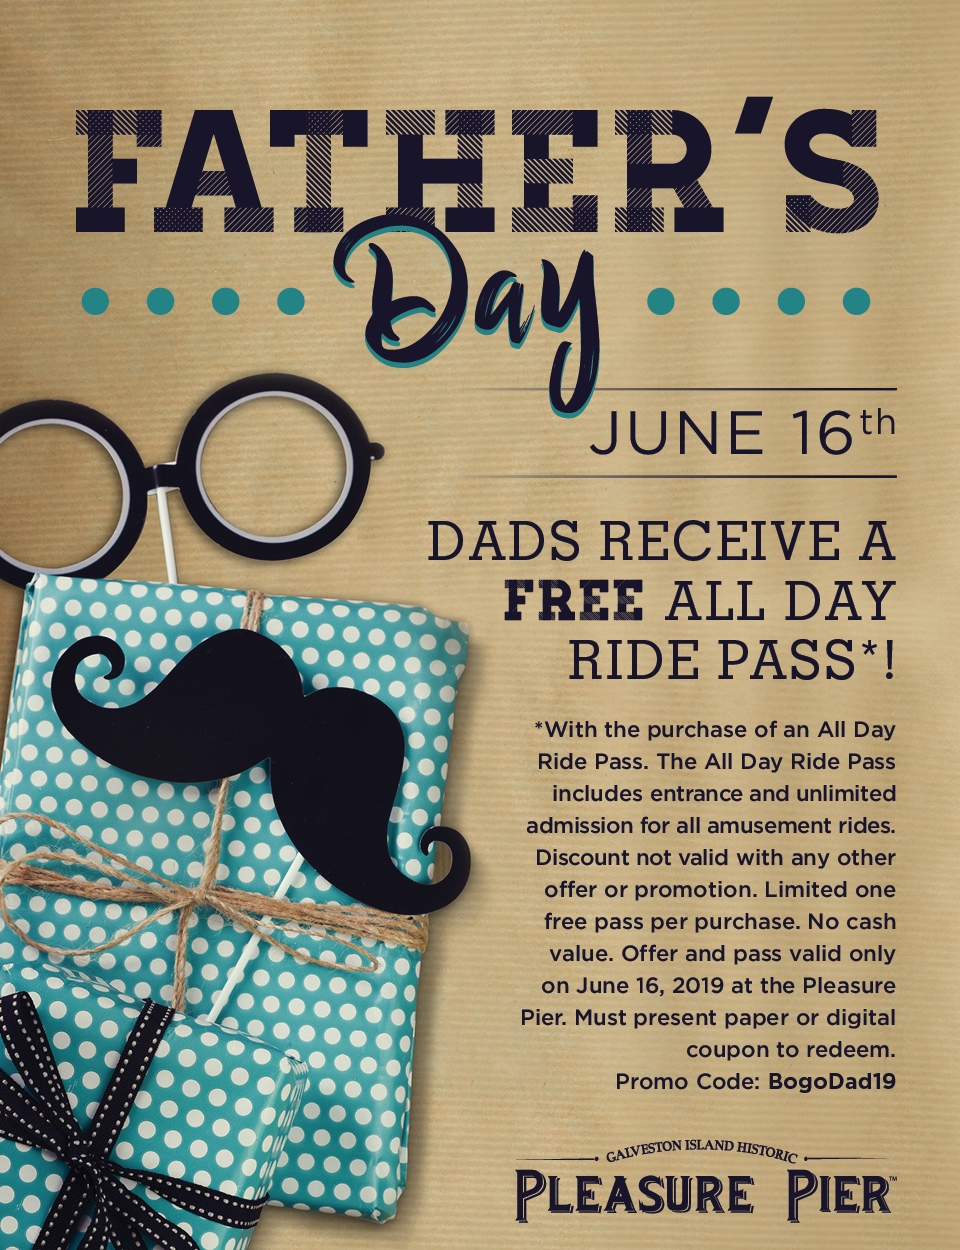 Father's Day June 16th Dads recieve a free all day ride pass